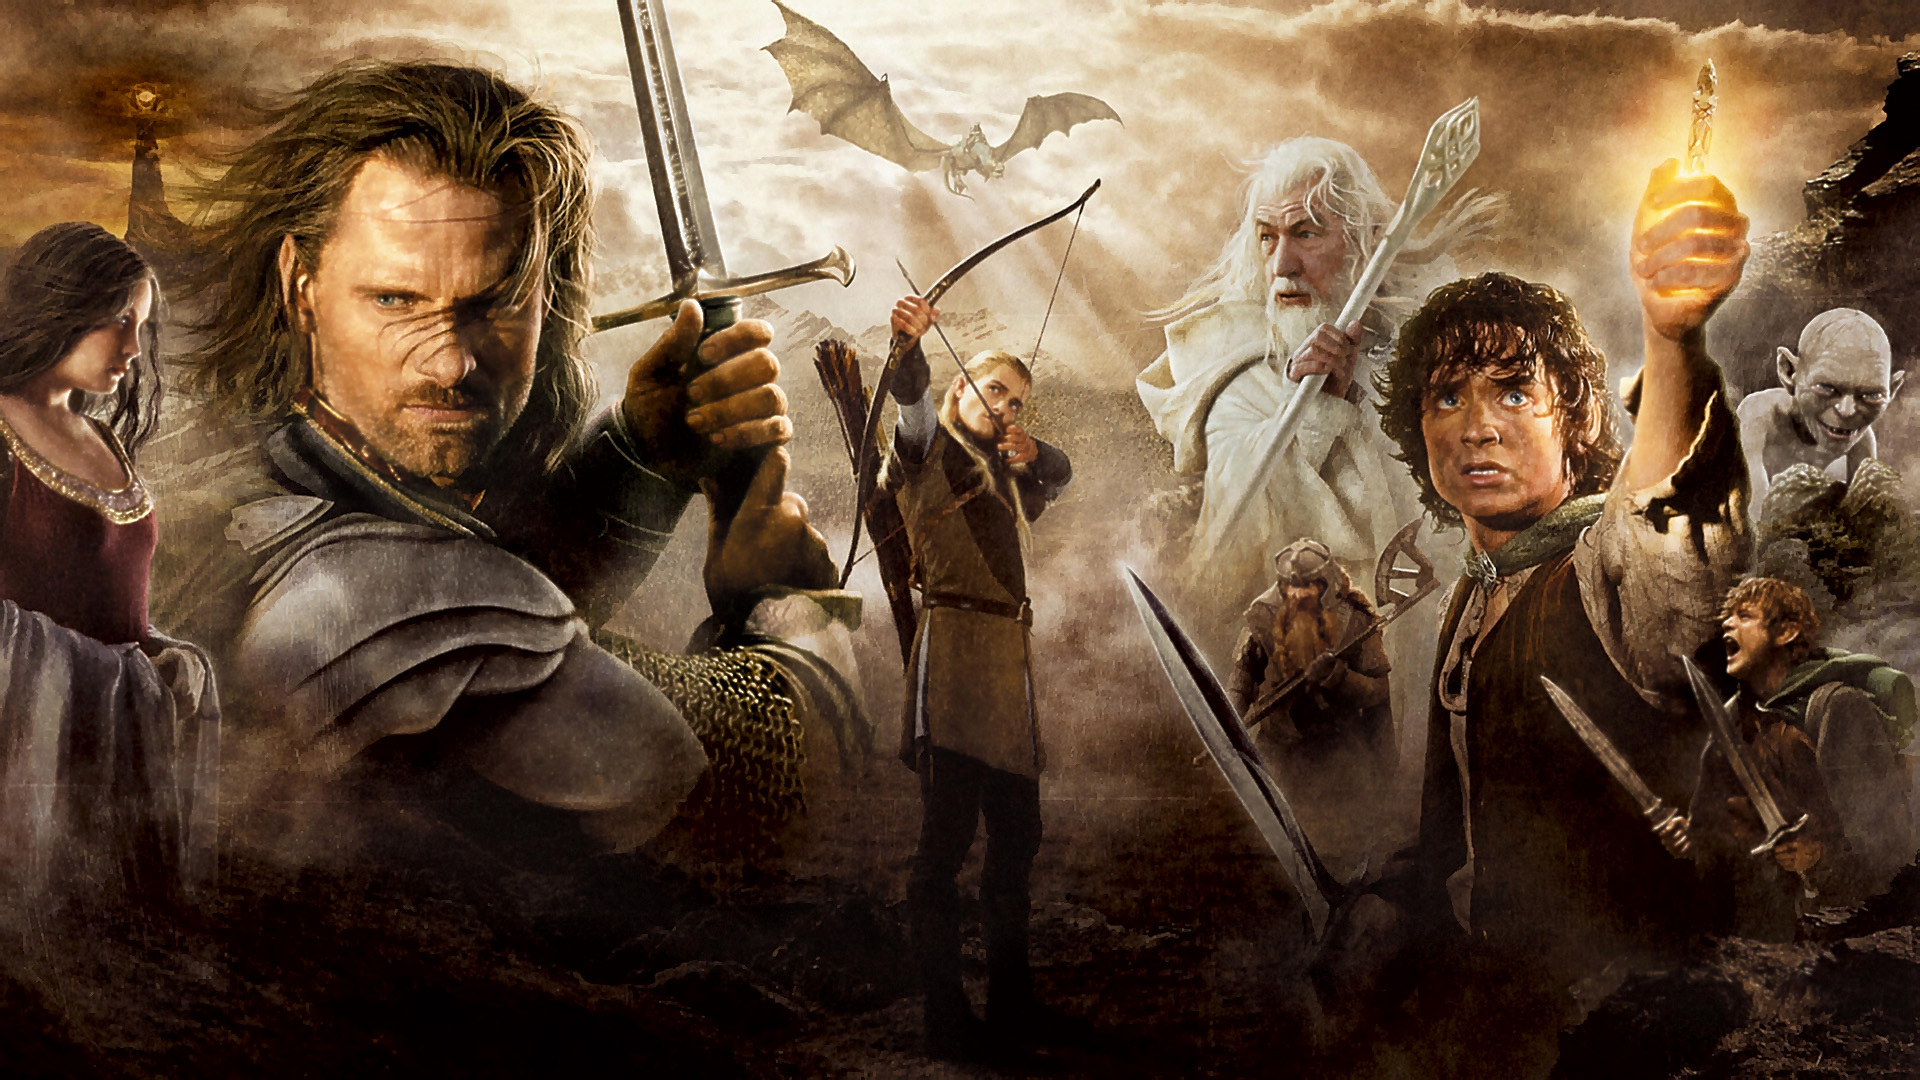 Gallery For Gt Lord Of The Rings Wallpaper